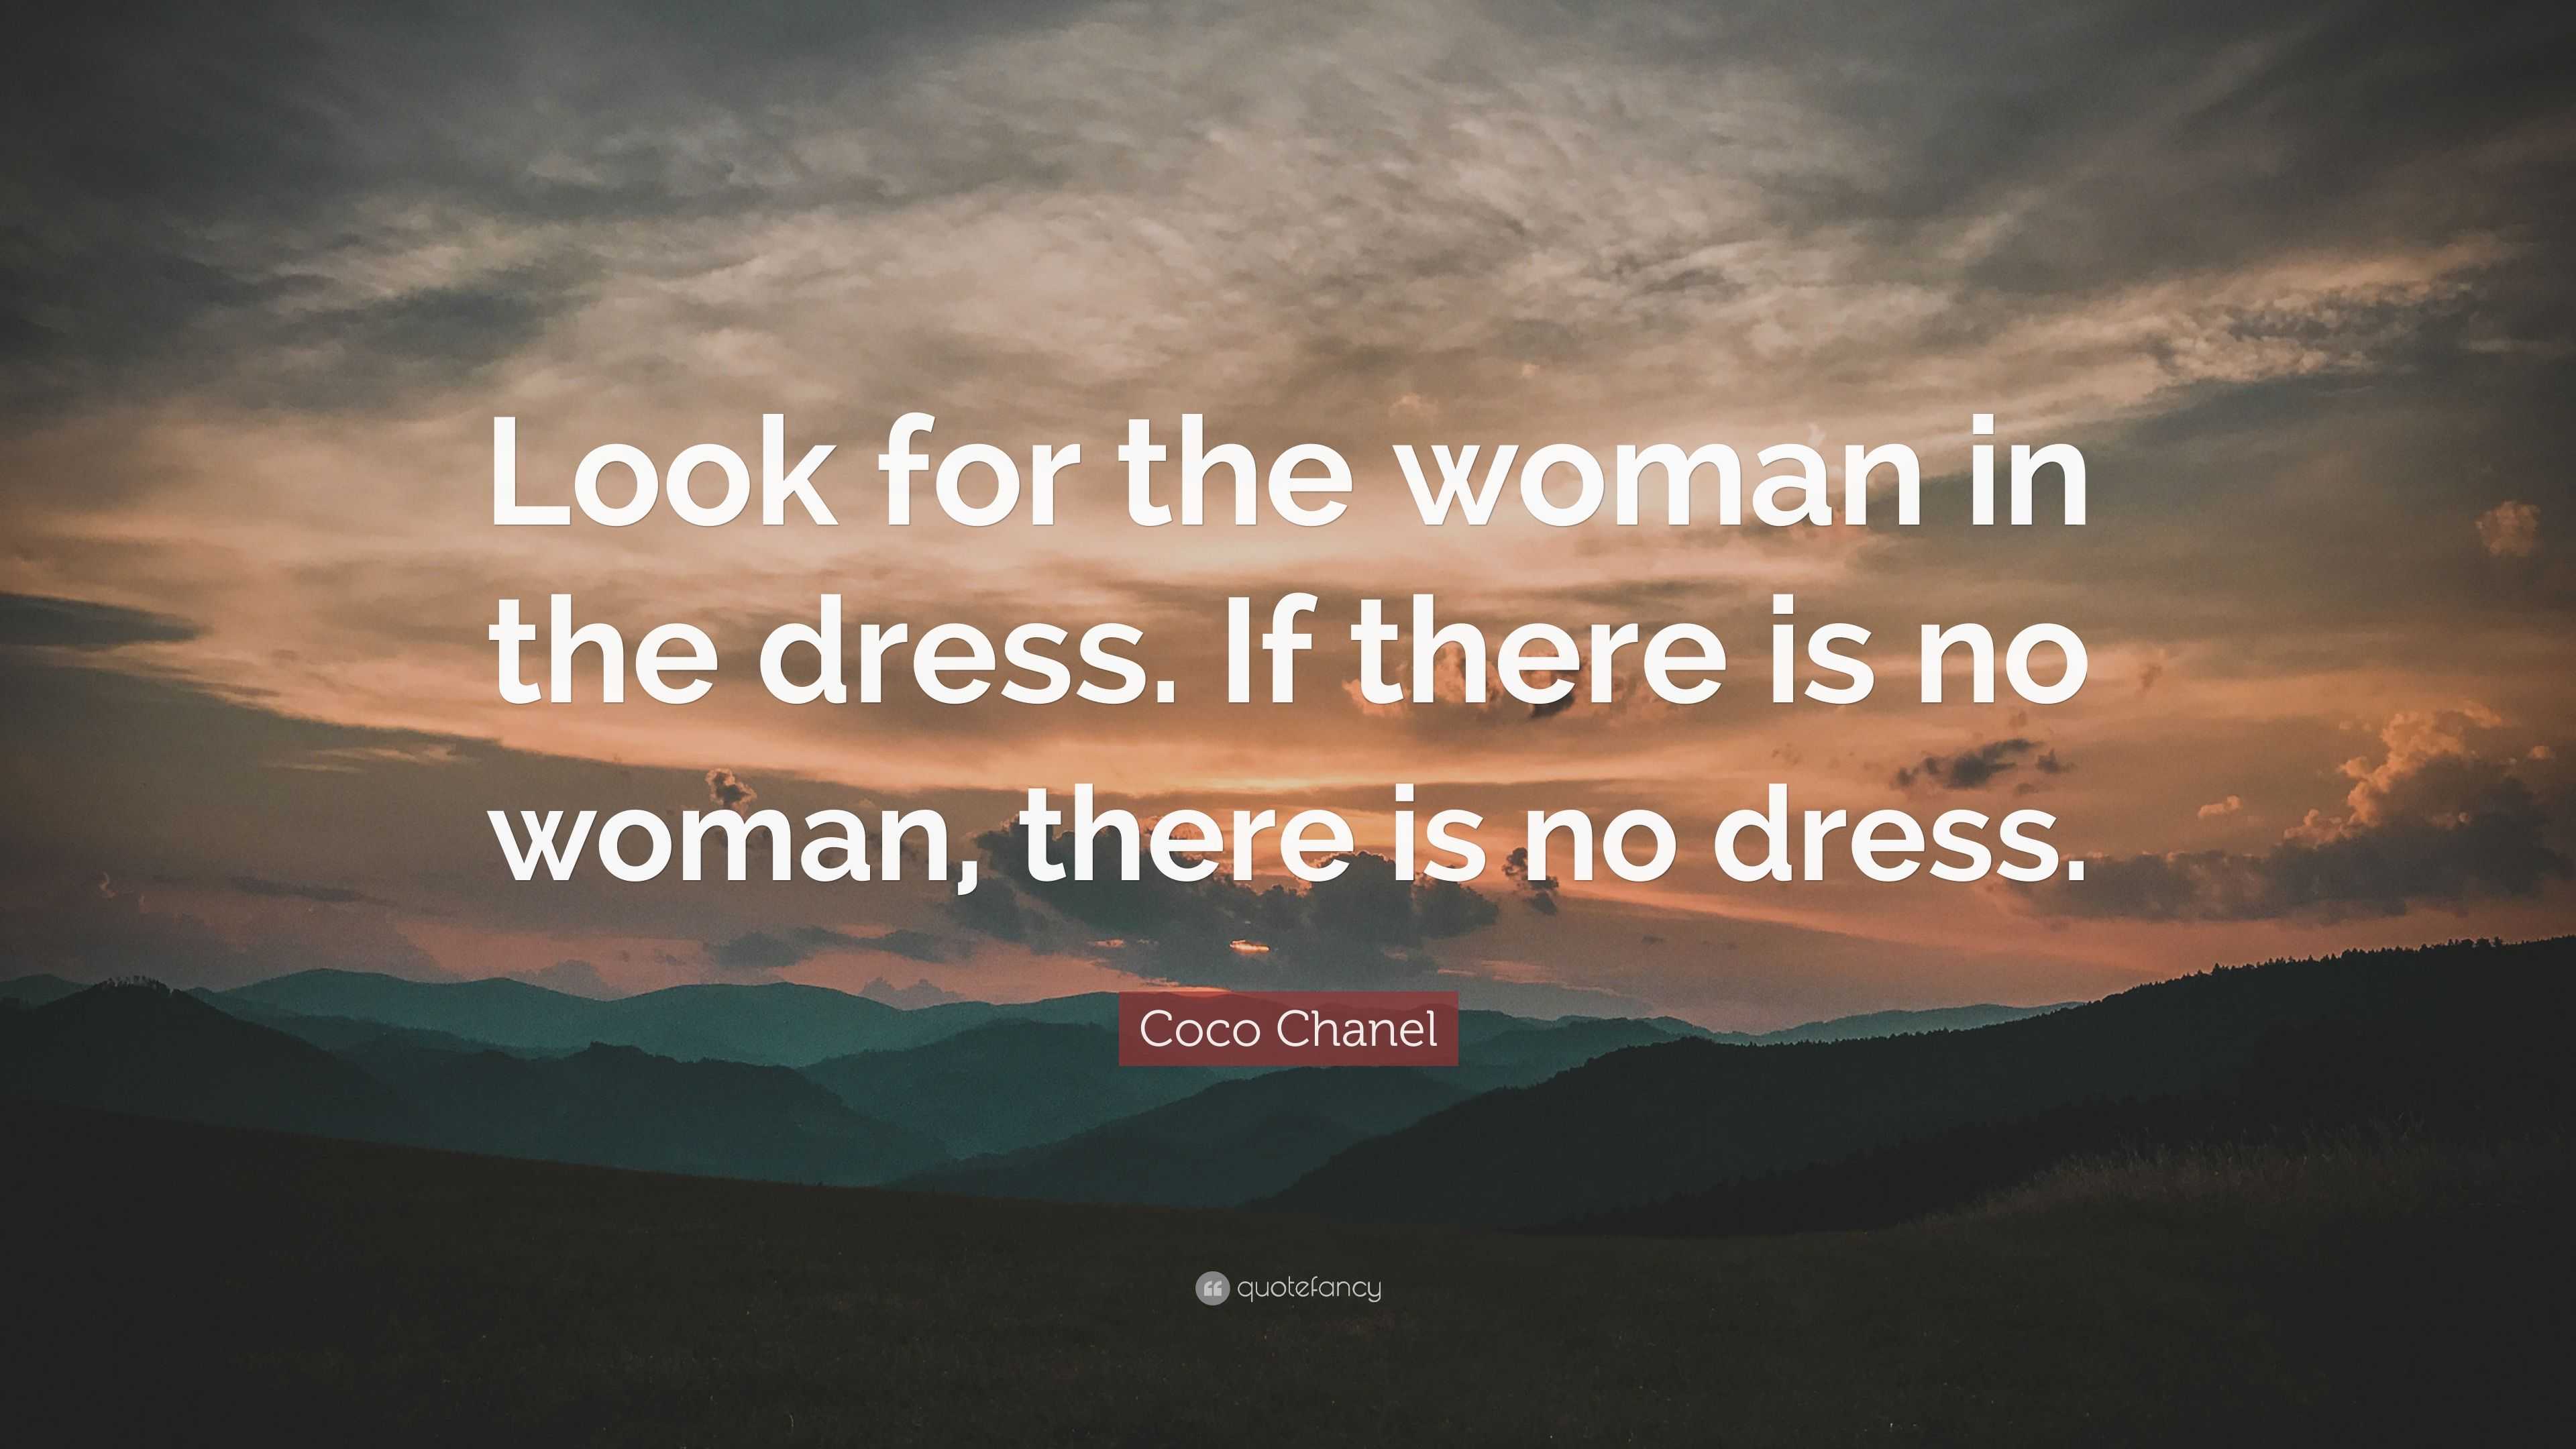 Coco Chanel Quote: “Look for the woman in the dress. If there is